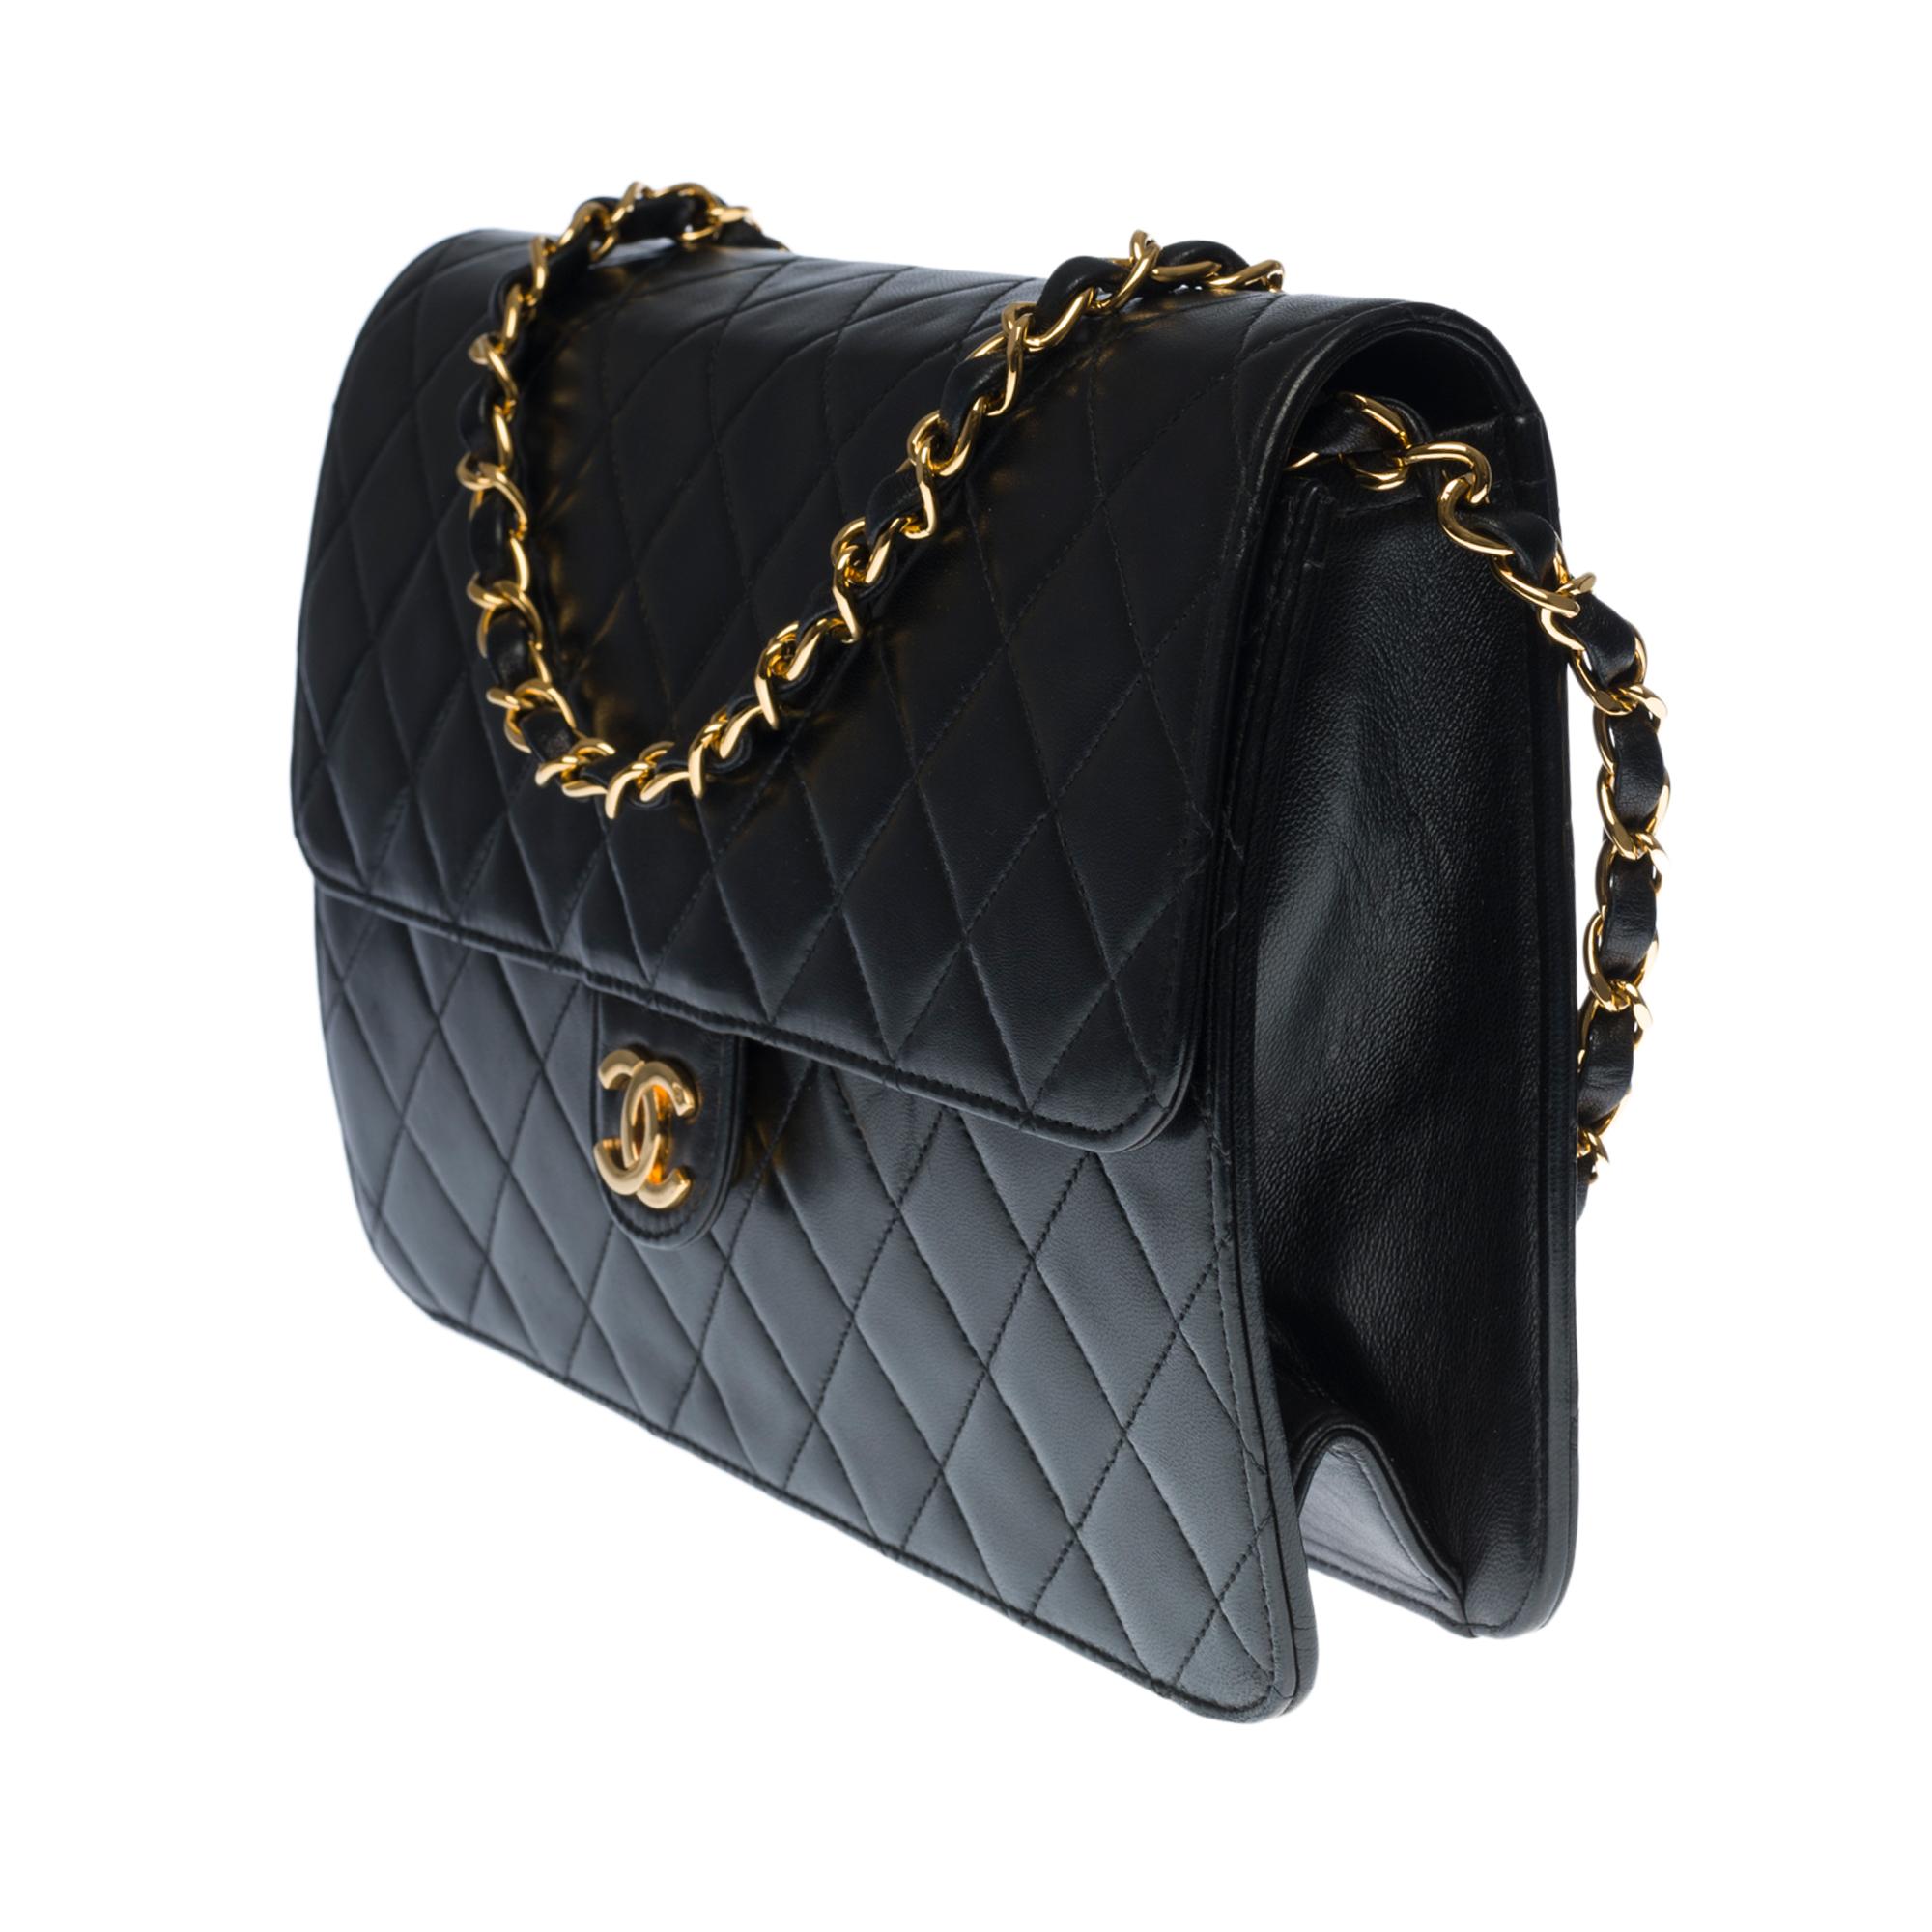 Black Chanel Classic Flap bag shoulder bag in black quilted lambskin and gold hardware